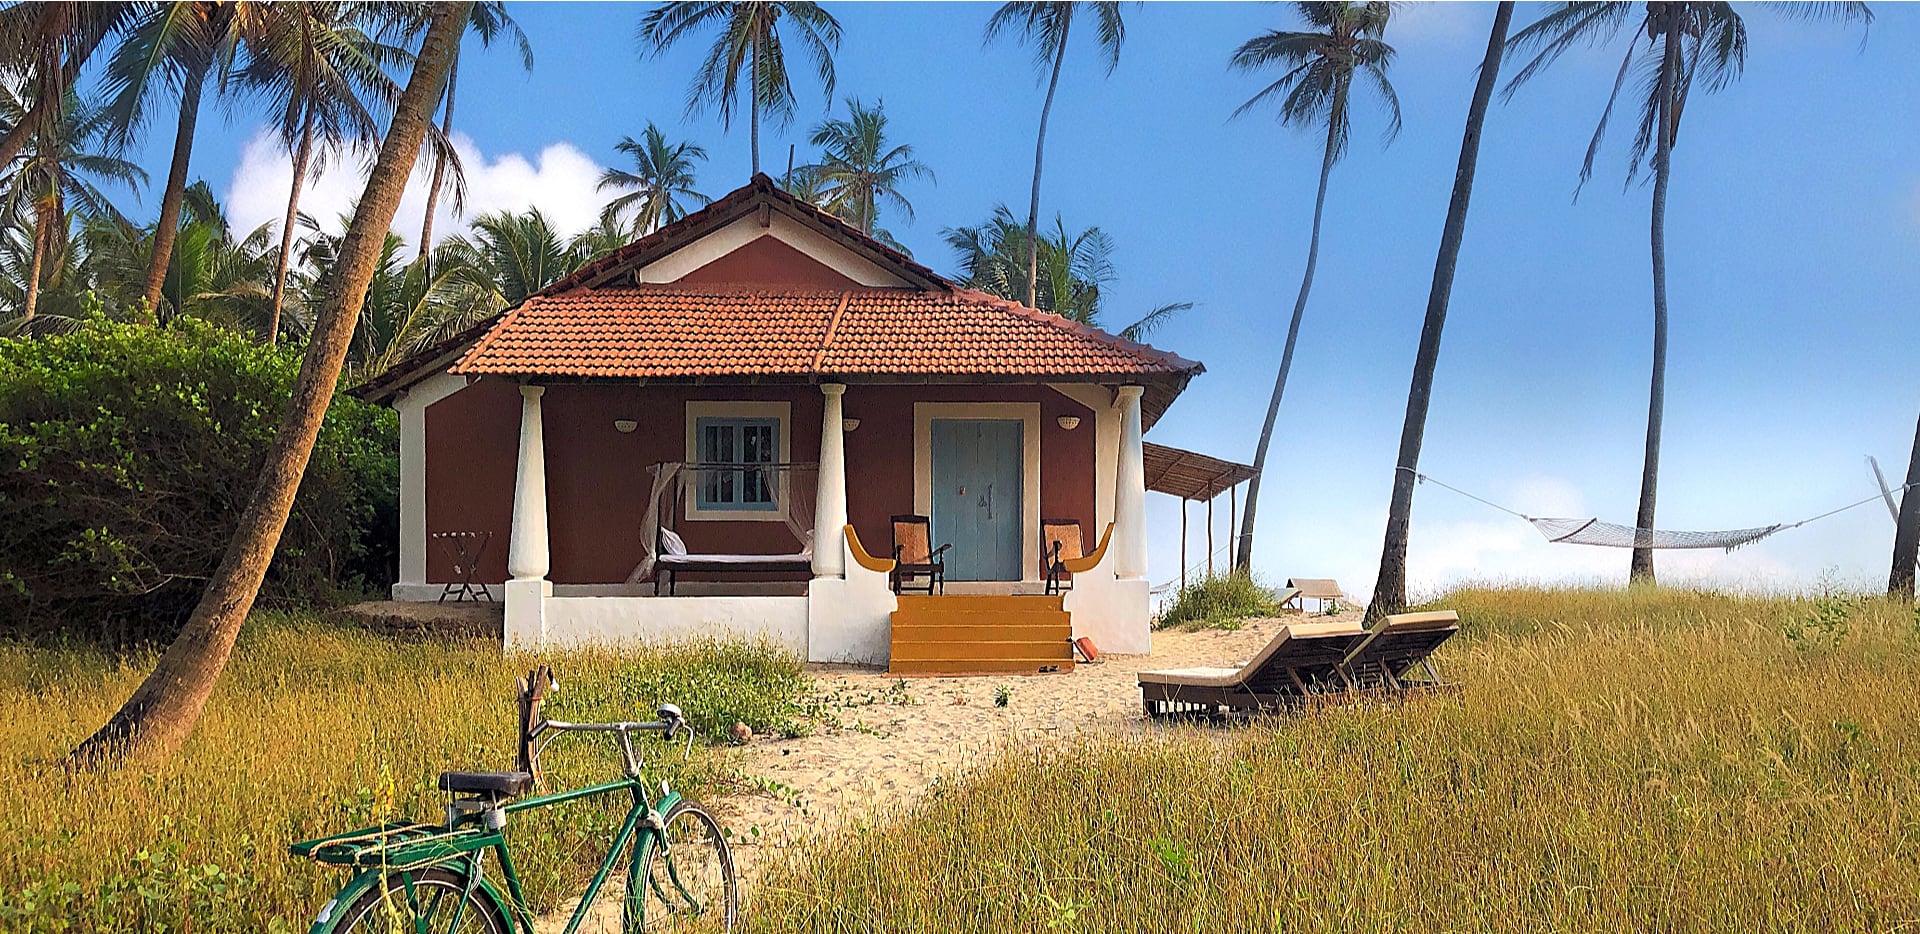 Boutique hotels | Elsewhere... India Goa, in